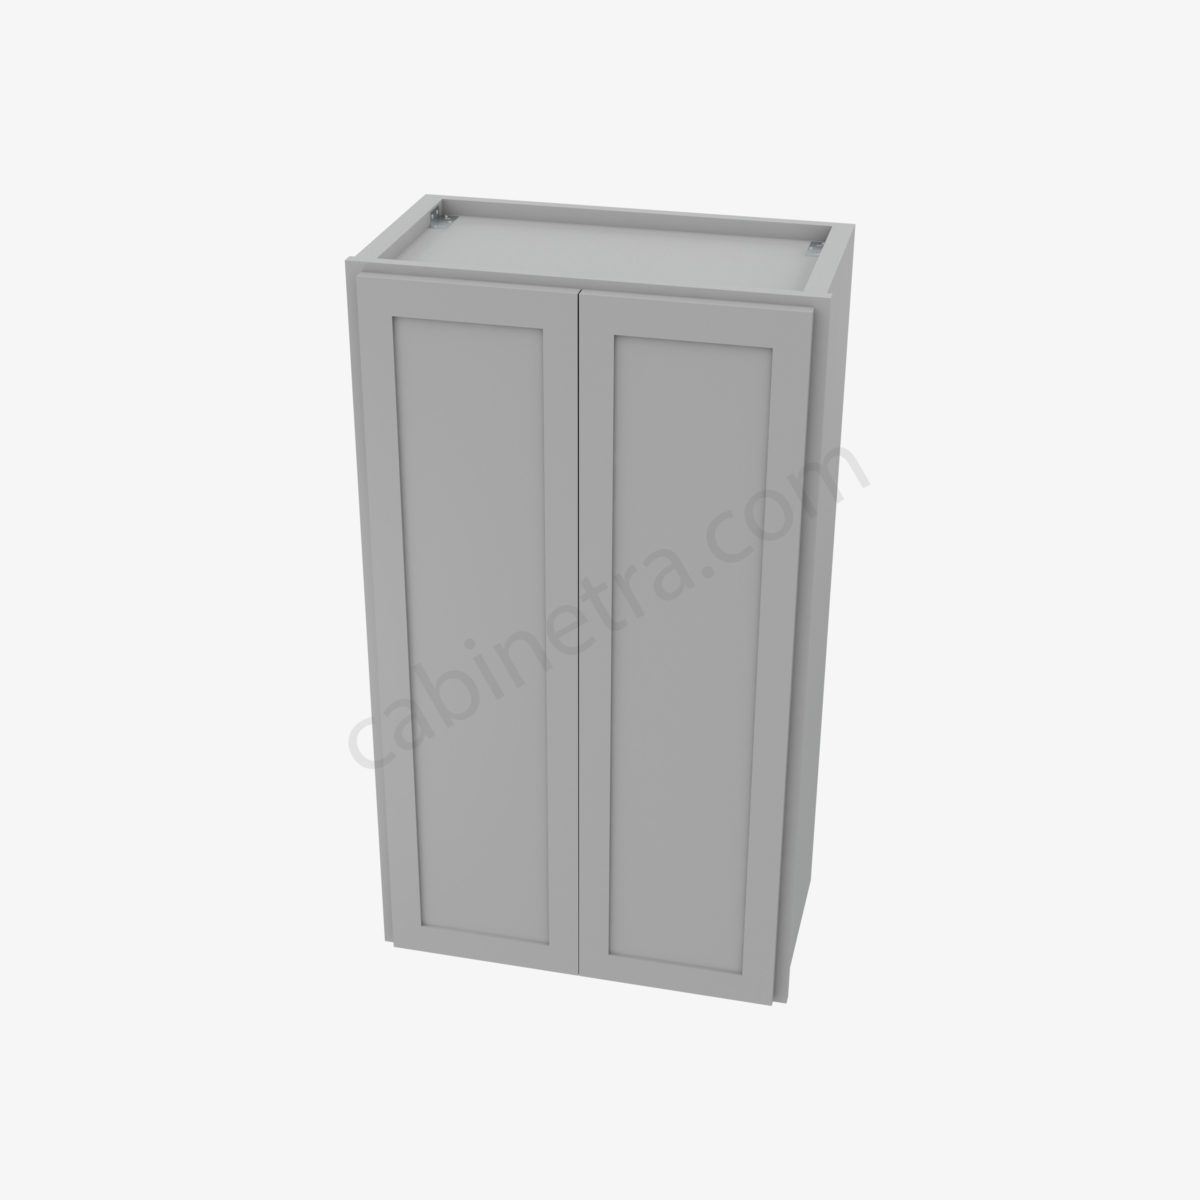 AB W2442B 3 Forevermark Lait Gray Shaker Cabinetra scaled